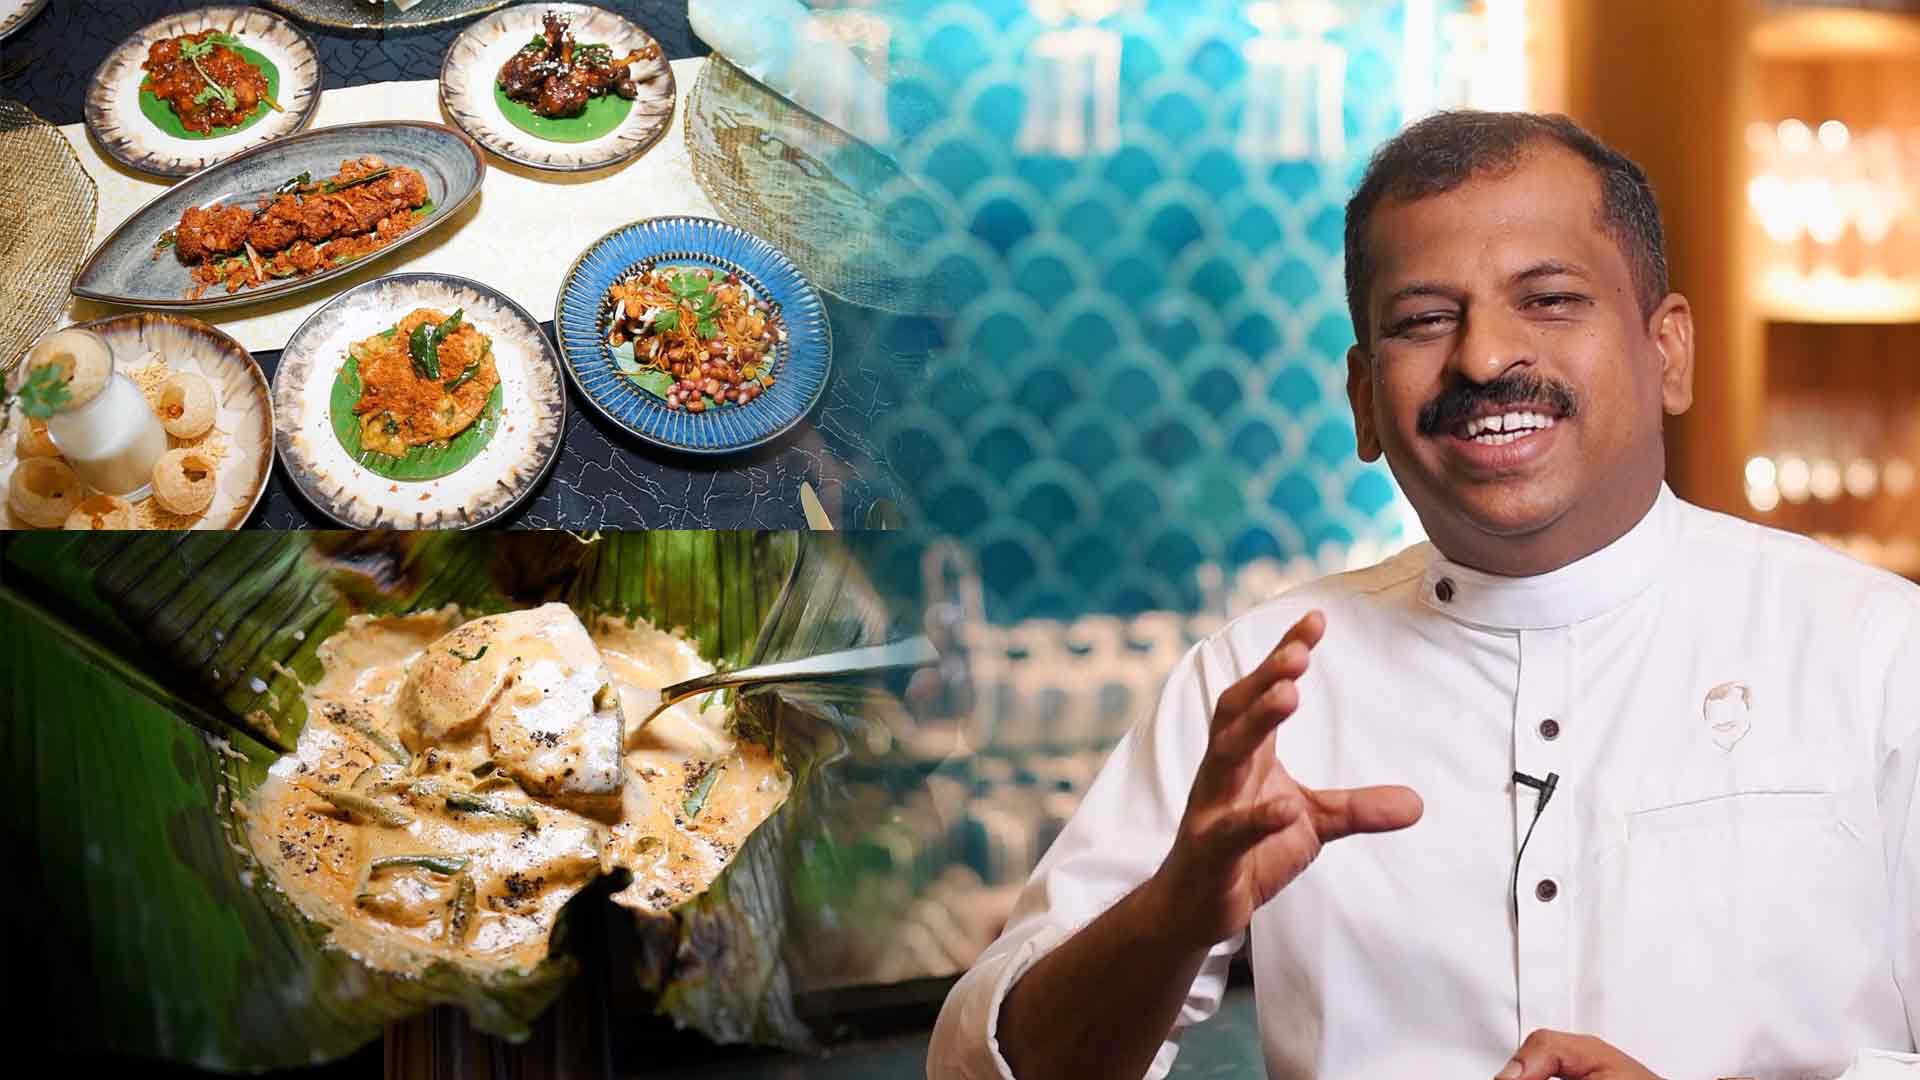 Want to try the famous Fish Nirvana? Head to Kochi's Restaurant Chef Pillai